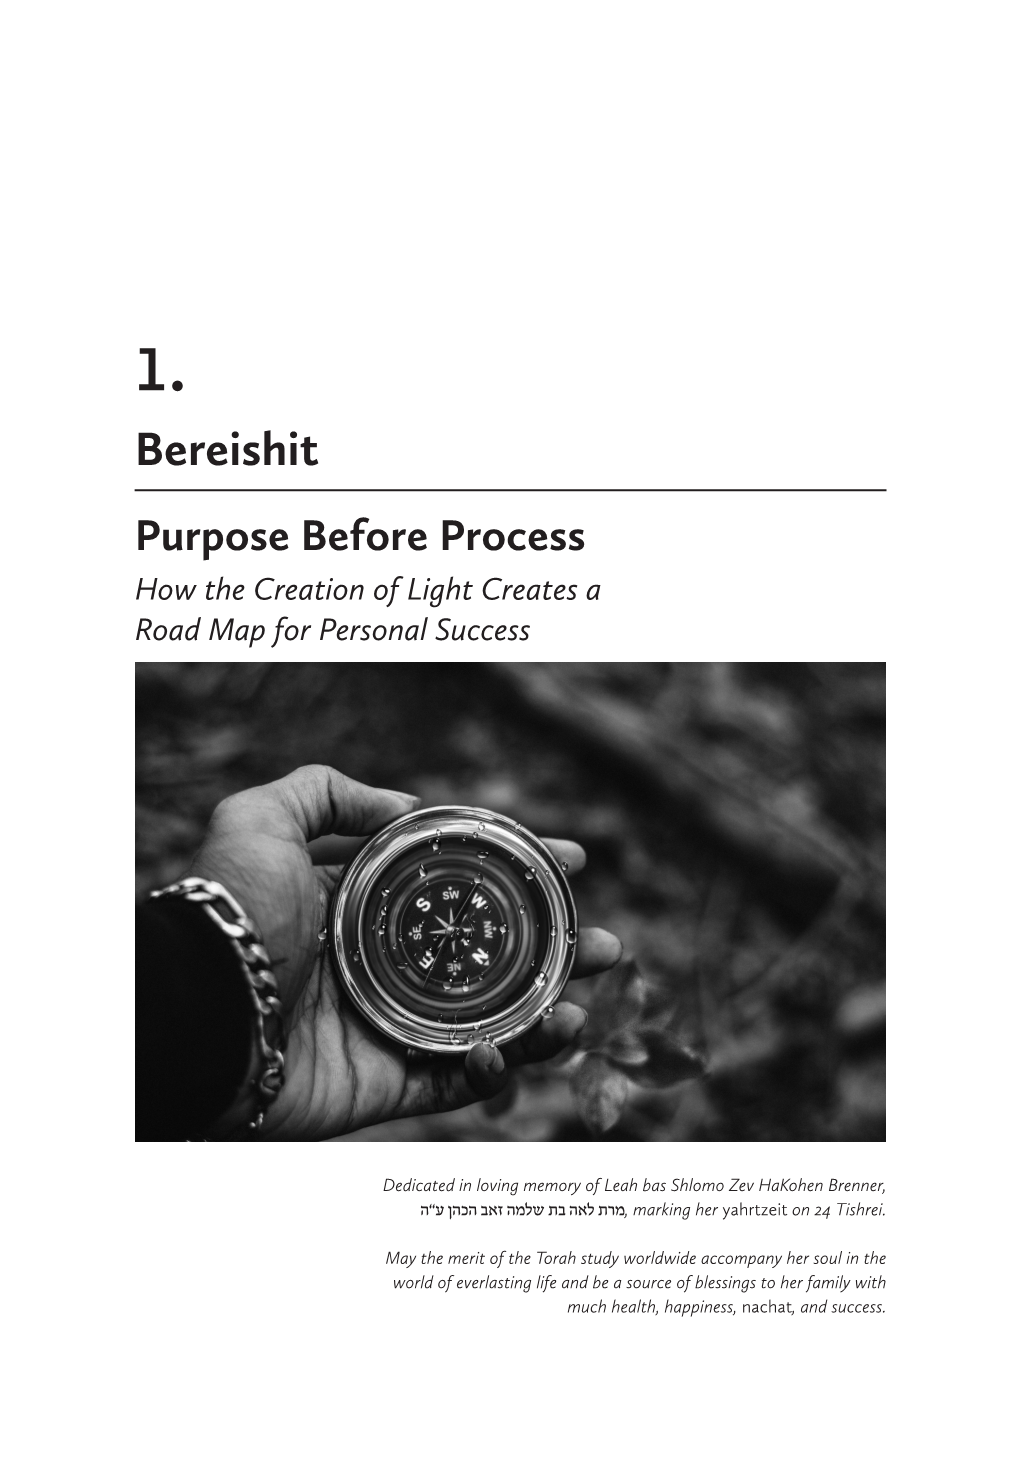 Bereishit Purpose Before Process How the Creation of Light Creates a Road Map for Personal Success